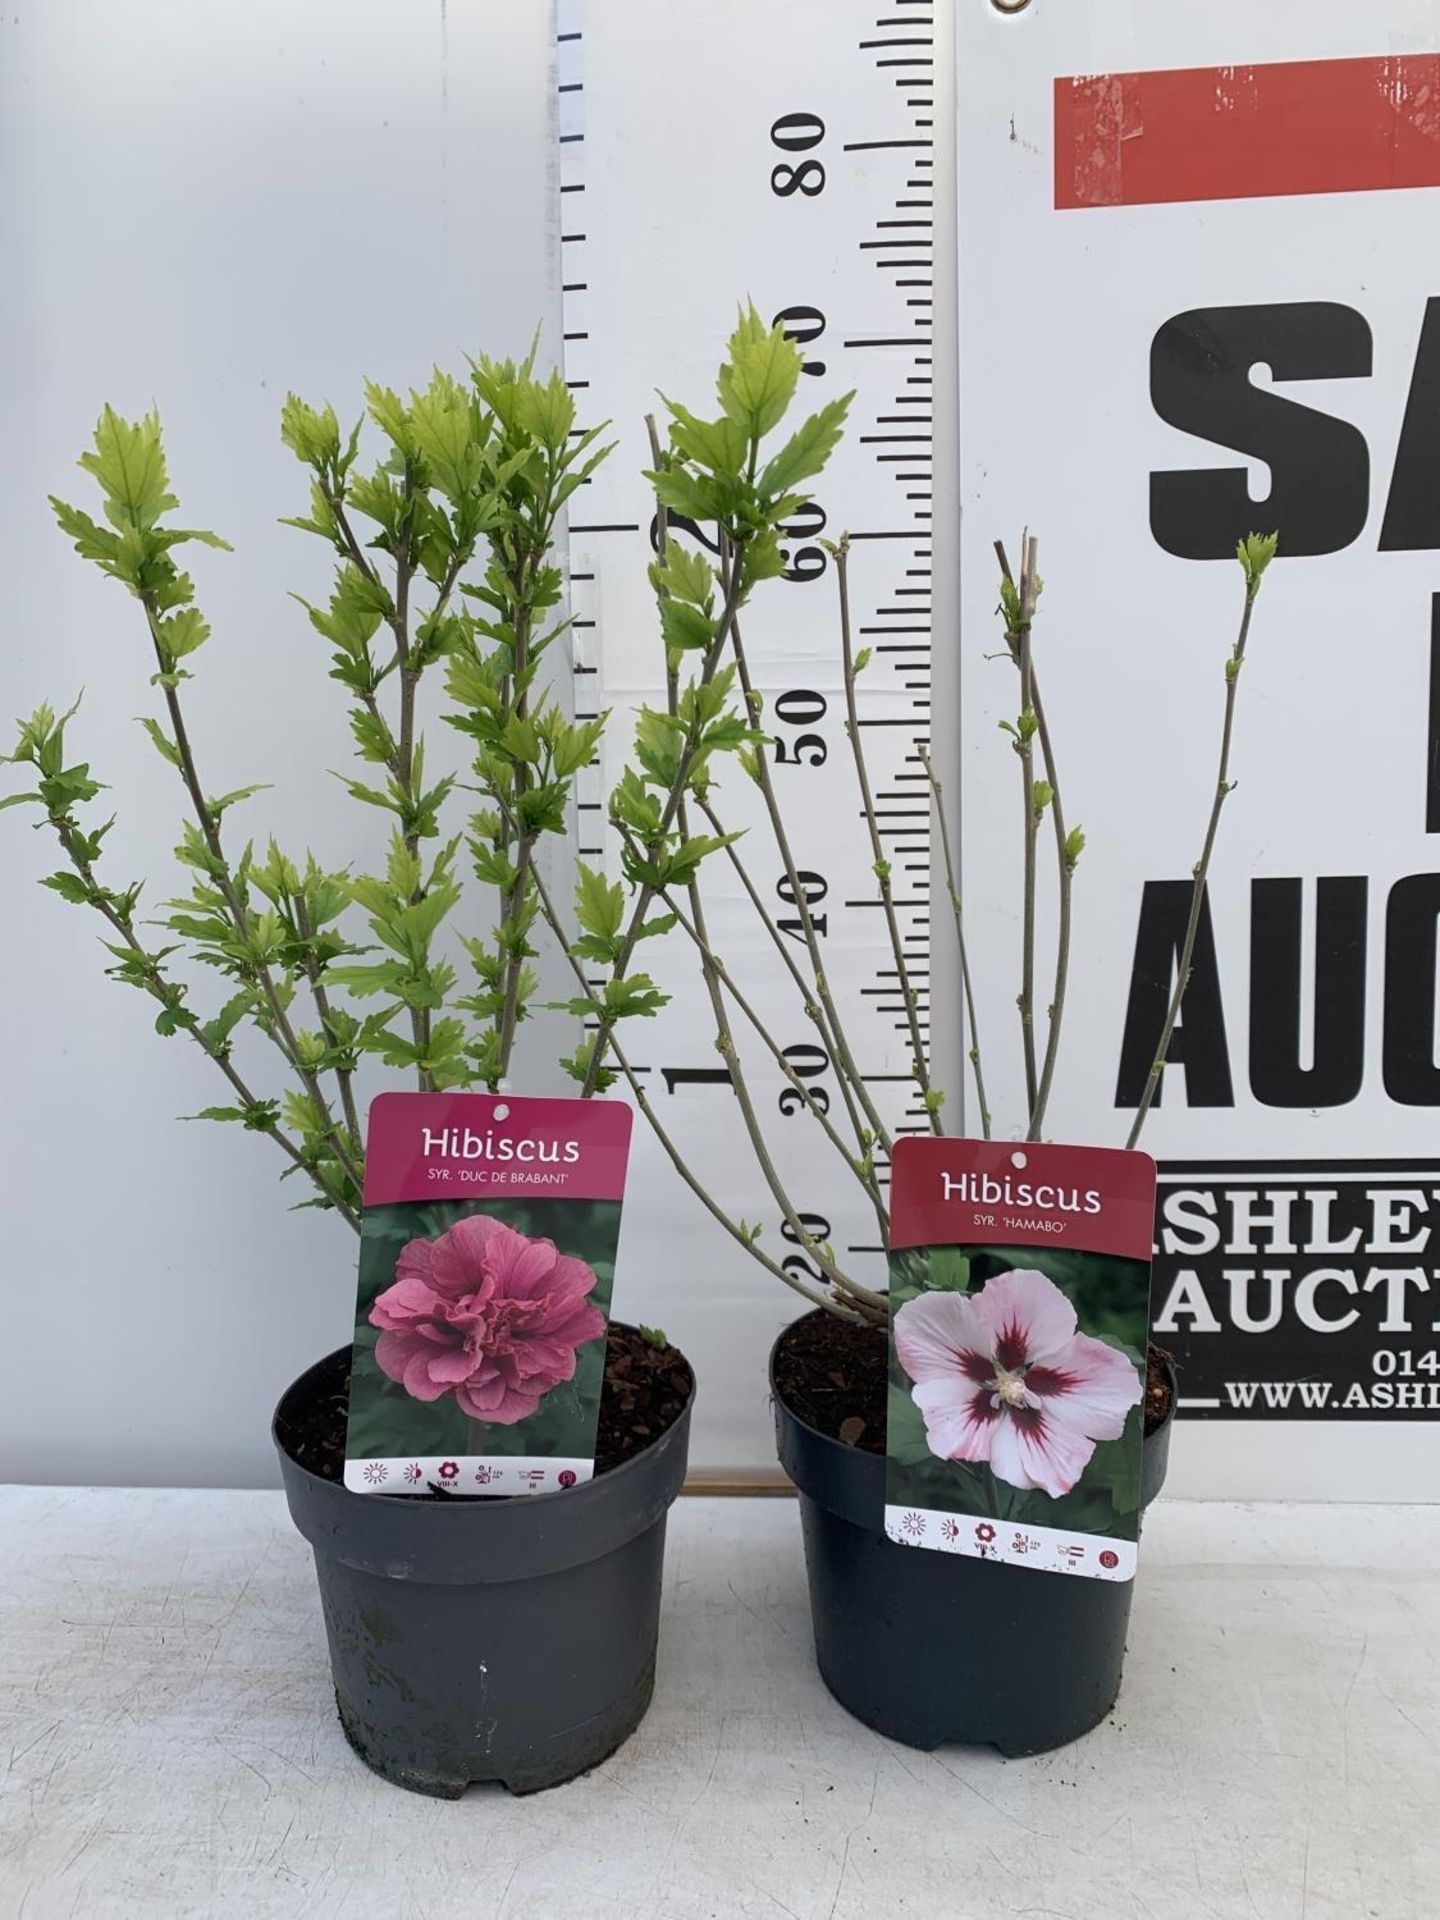 TWO HIBISCUS SYRIACUS DUC DE BRABANT AND HAMABO IN 3 LTR POTS 60CM TALL PLUS VAT TO BE SOLD FOR - Image 2 of 8